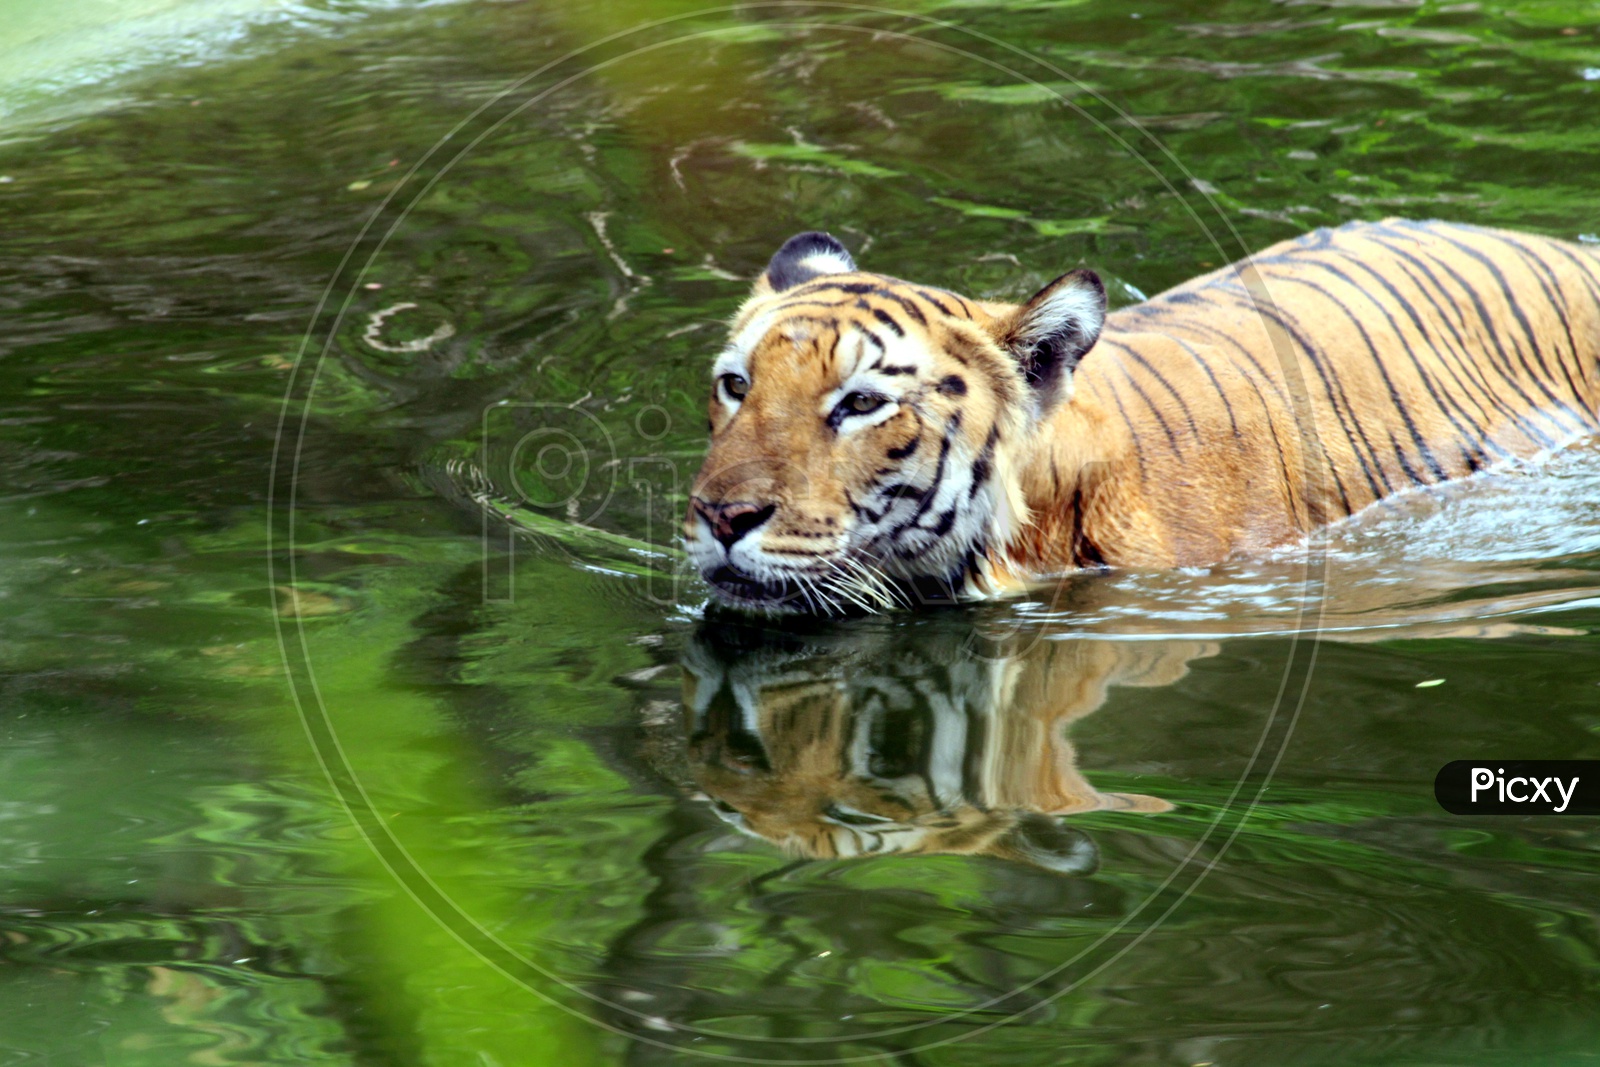 Tiger in the Pond